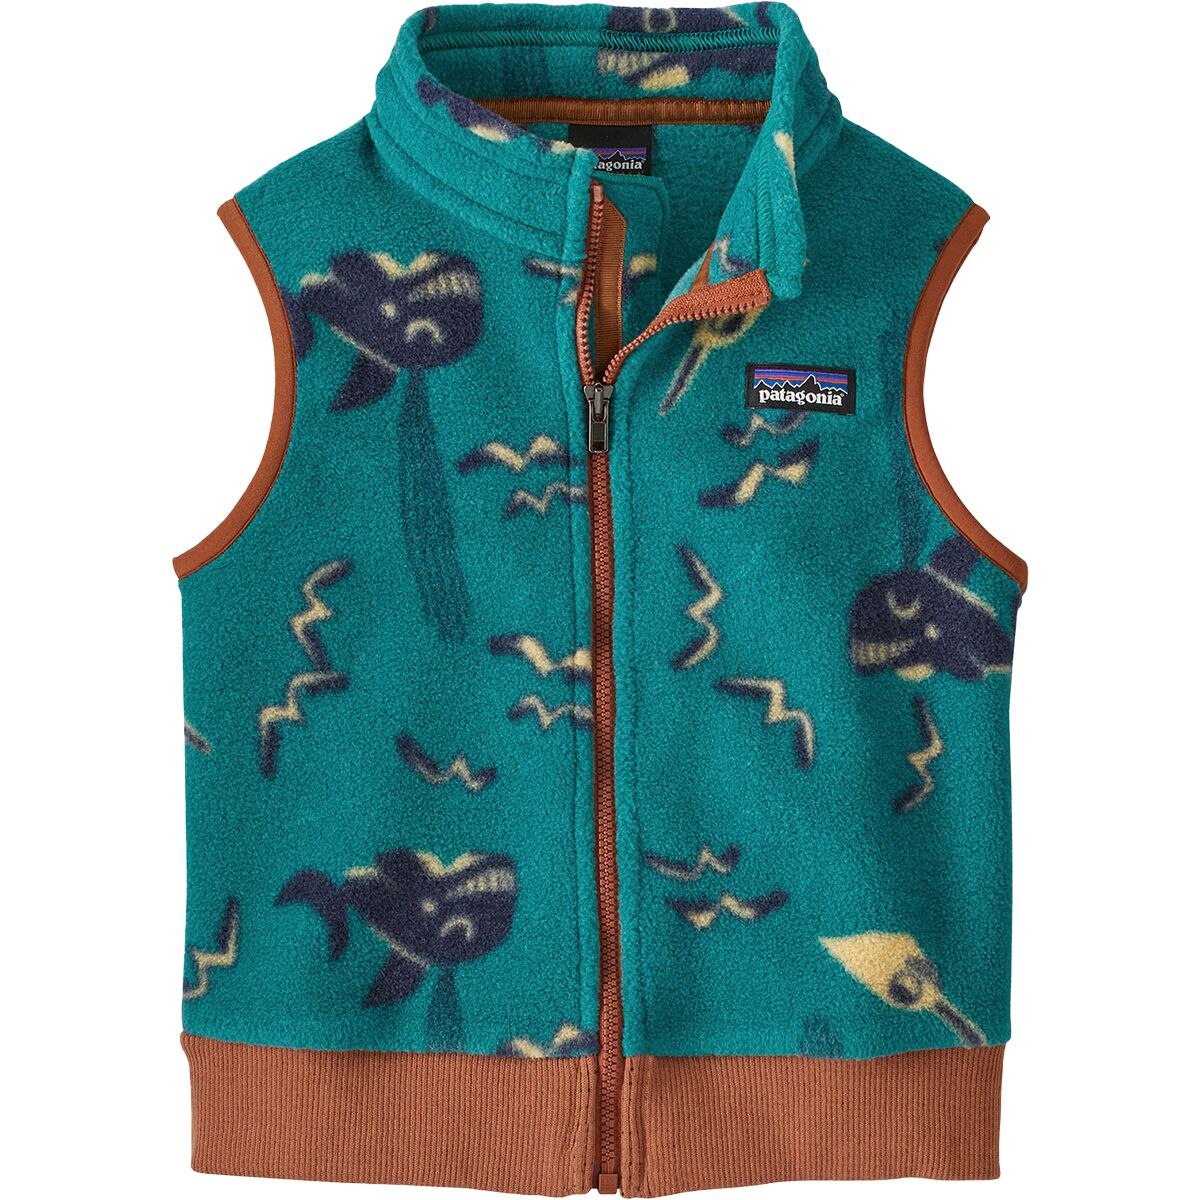 Patagonia Baby Synch Vest - Toddler Boys'